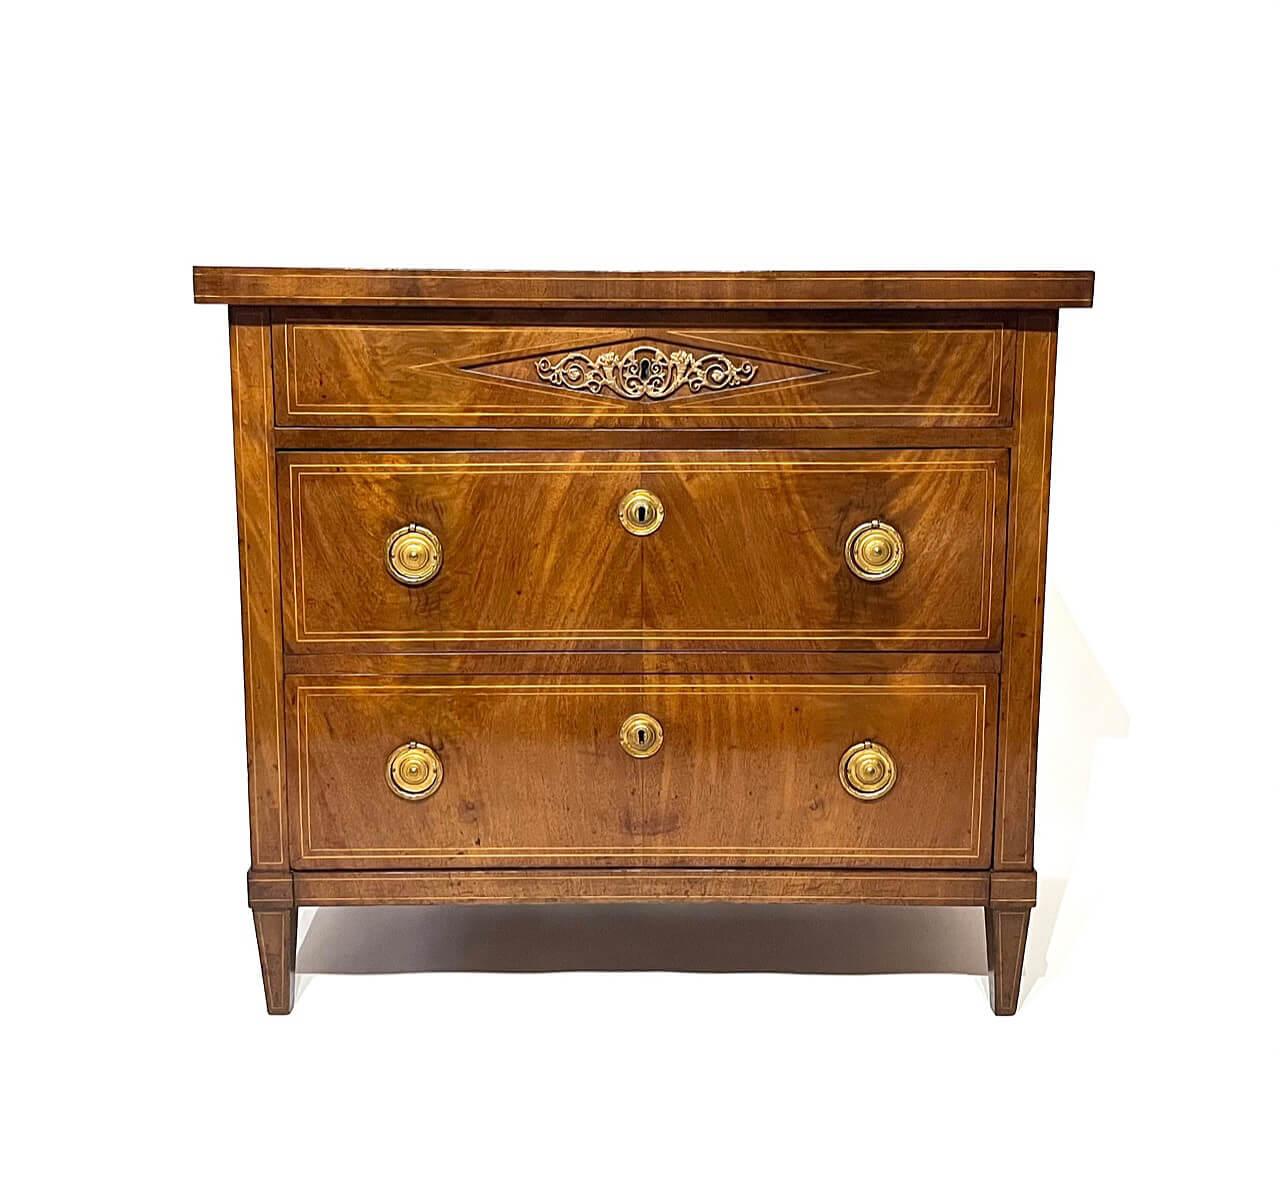 An elegant circa 1800 Prussian Baltic Directoire style three drawer commode having luminescent mahogany veneered and satinwood line-inlaid oak and pine case, the thick slab top above locking top drawer with center cornucopia and foliate scroll